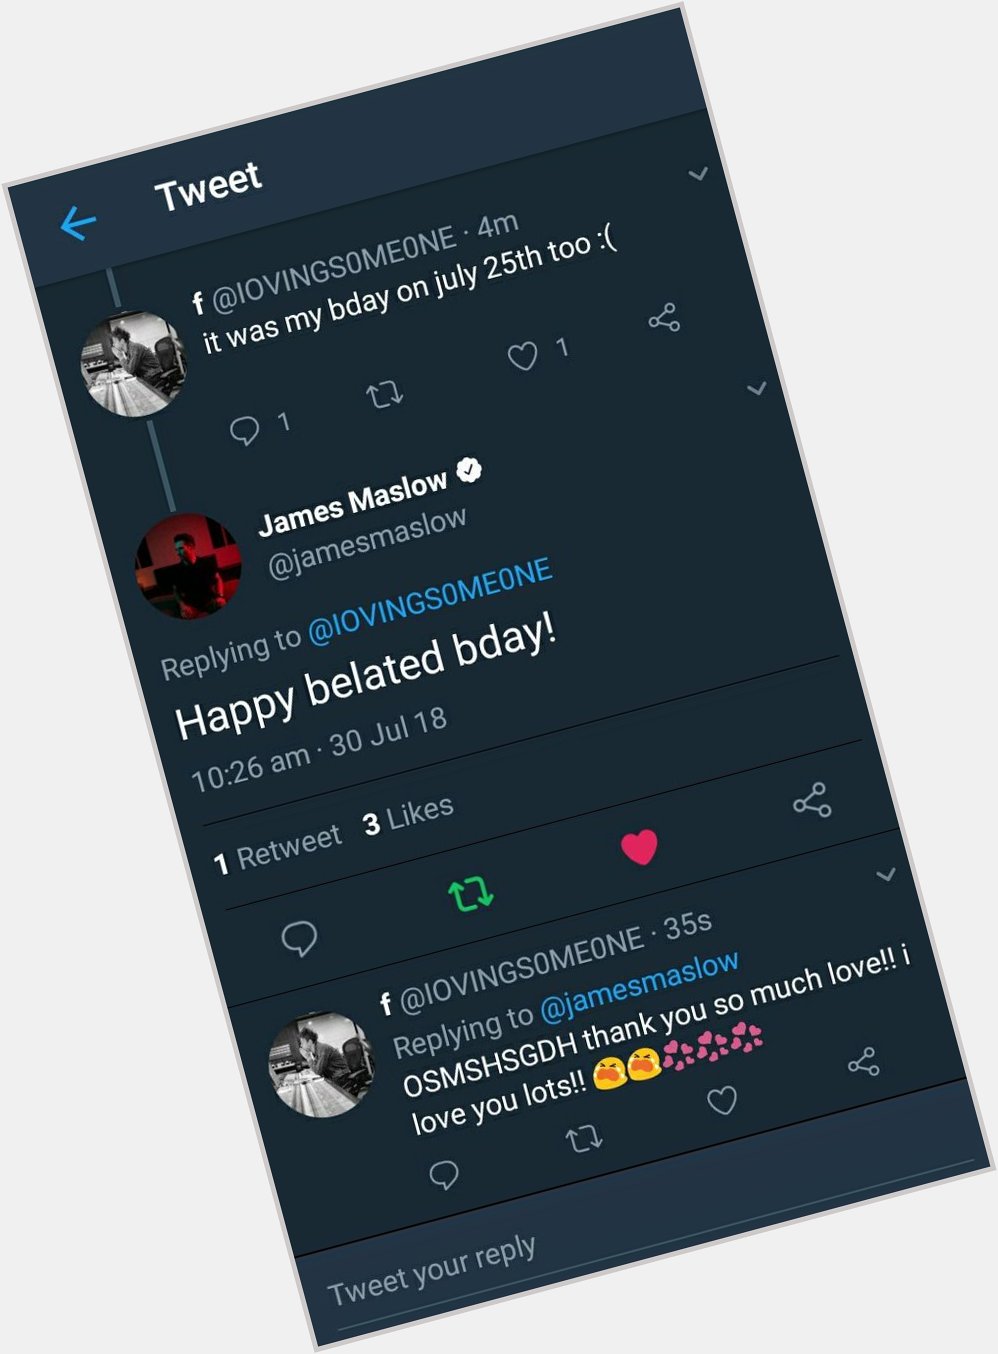 Oof james maslow from big time rush wished me a happy birthday on my other acc YEET 